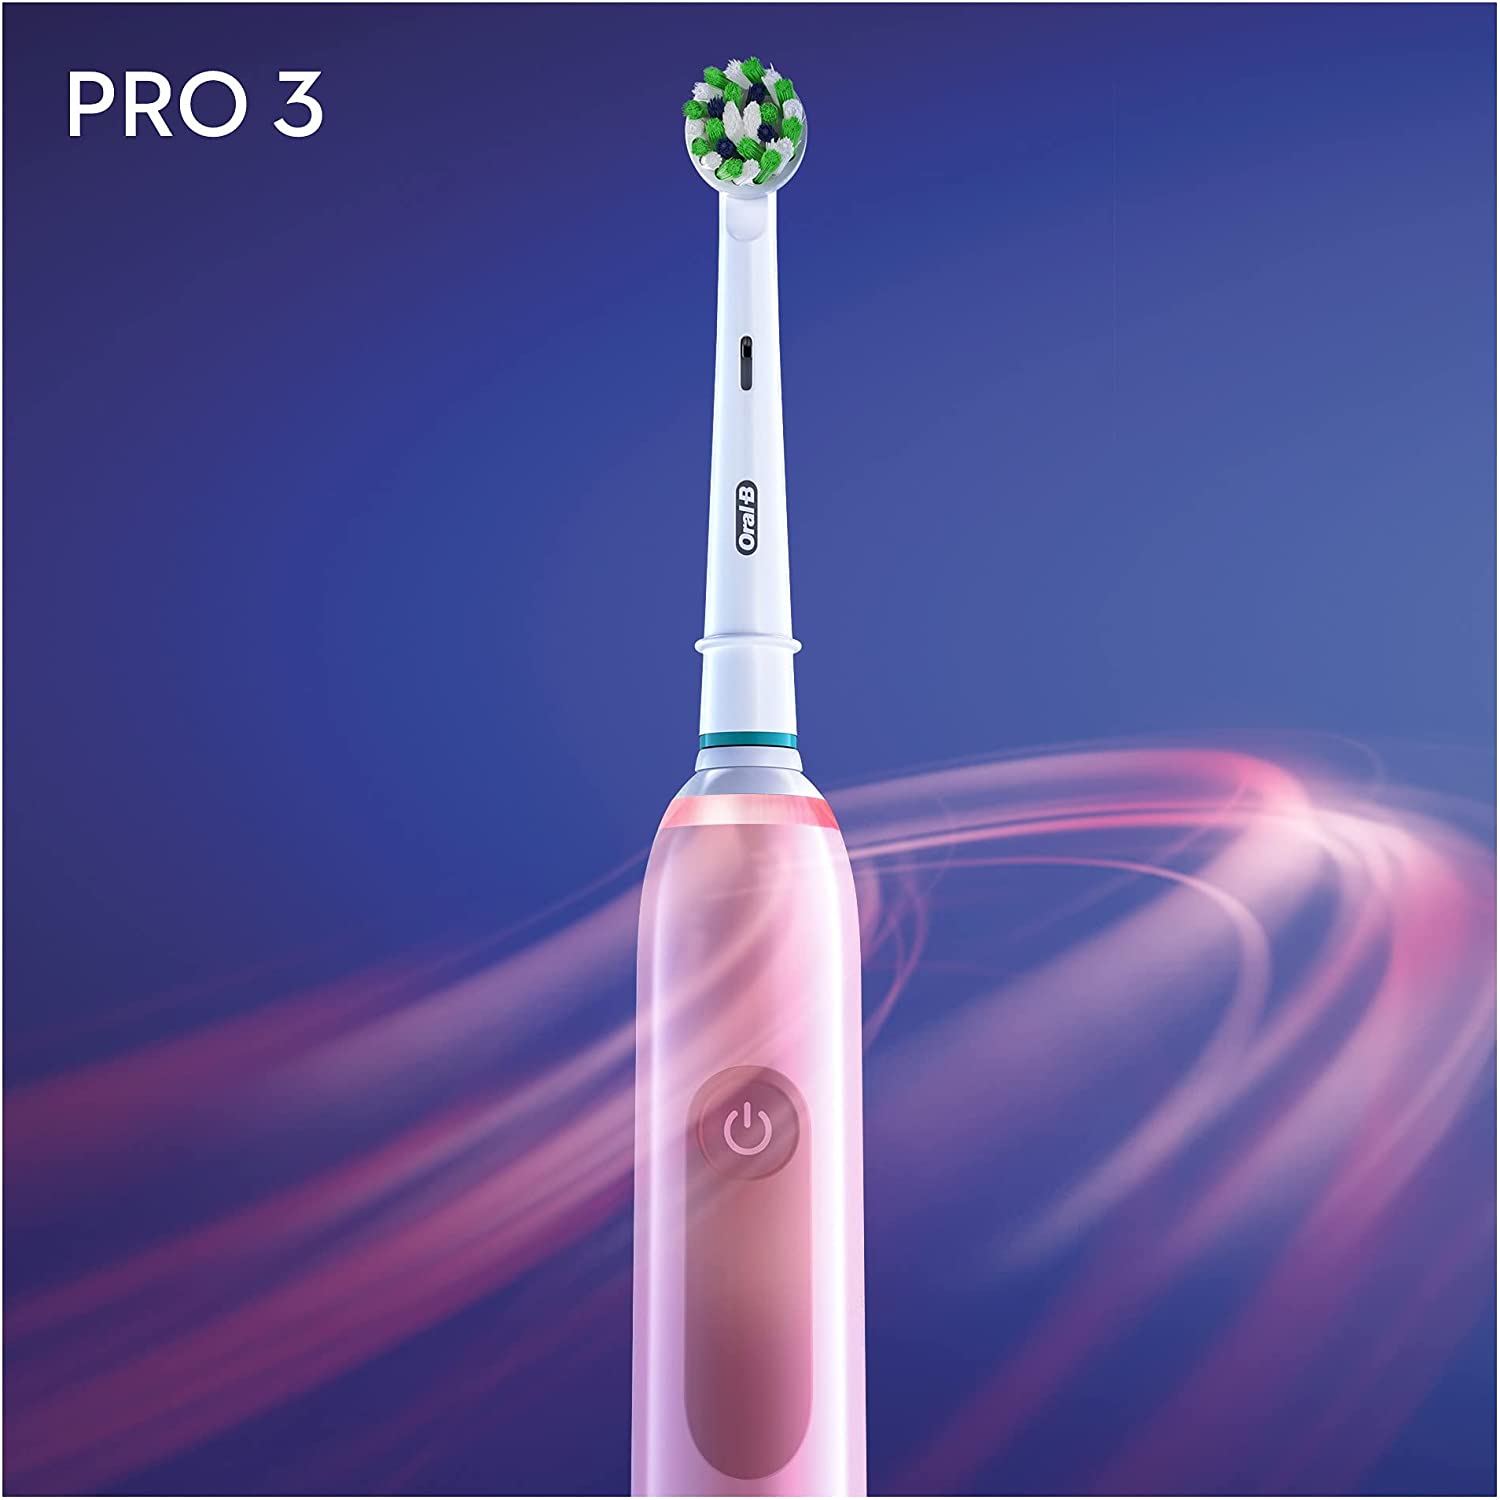 Oral-B Pro 3 - 3900 - Set of 2 Electric Toothbrushes Pink & Black, 2 Handles with Visible Pressure Sensor, 2 Toothbrush Heads - Healthxpress.ie